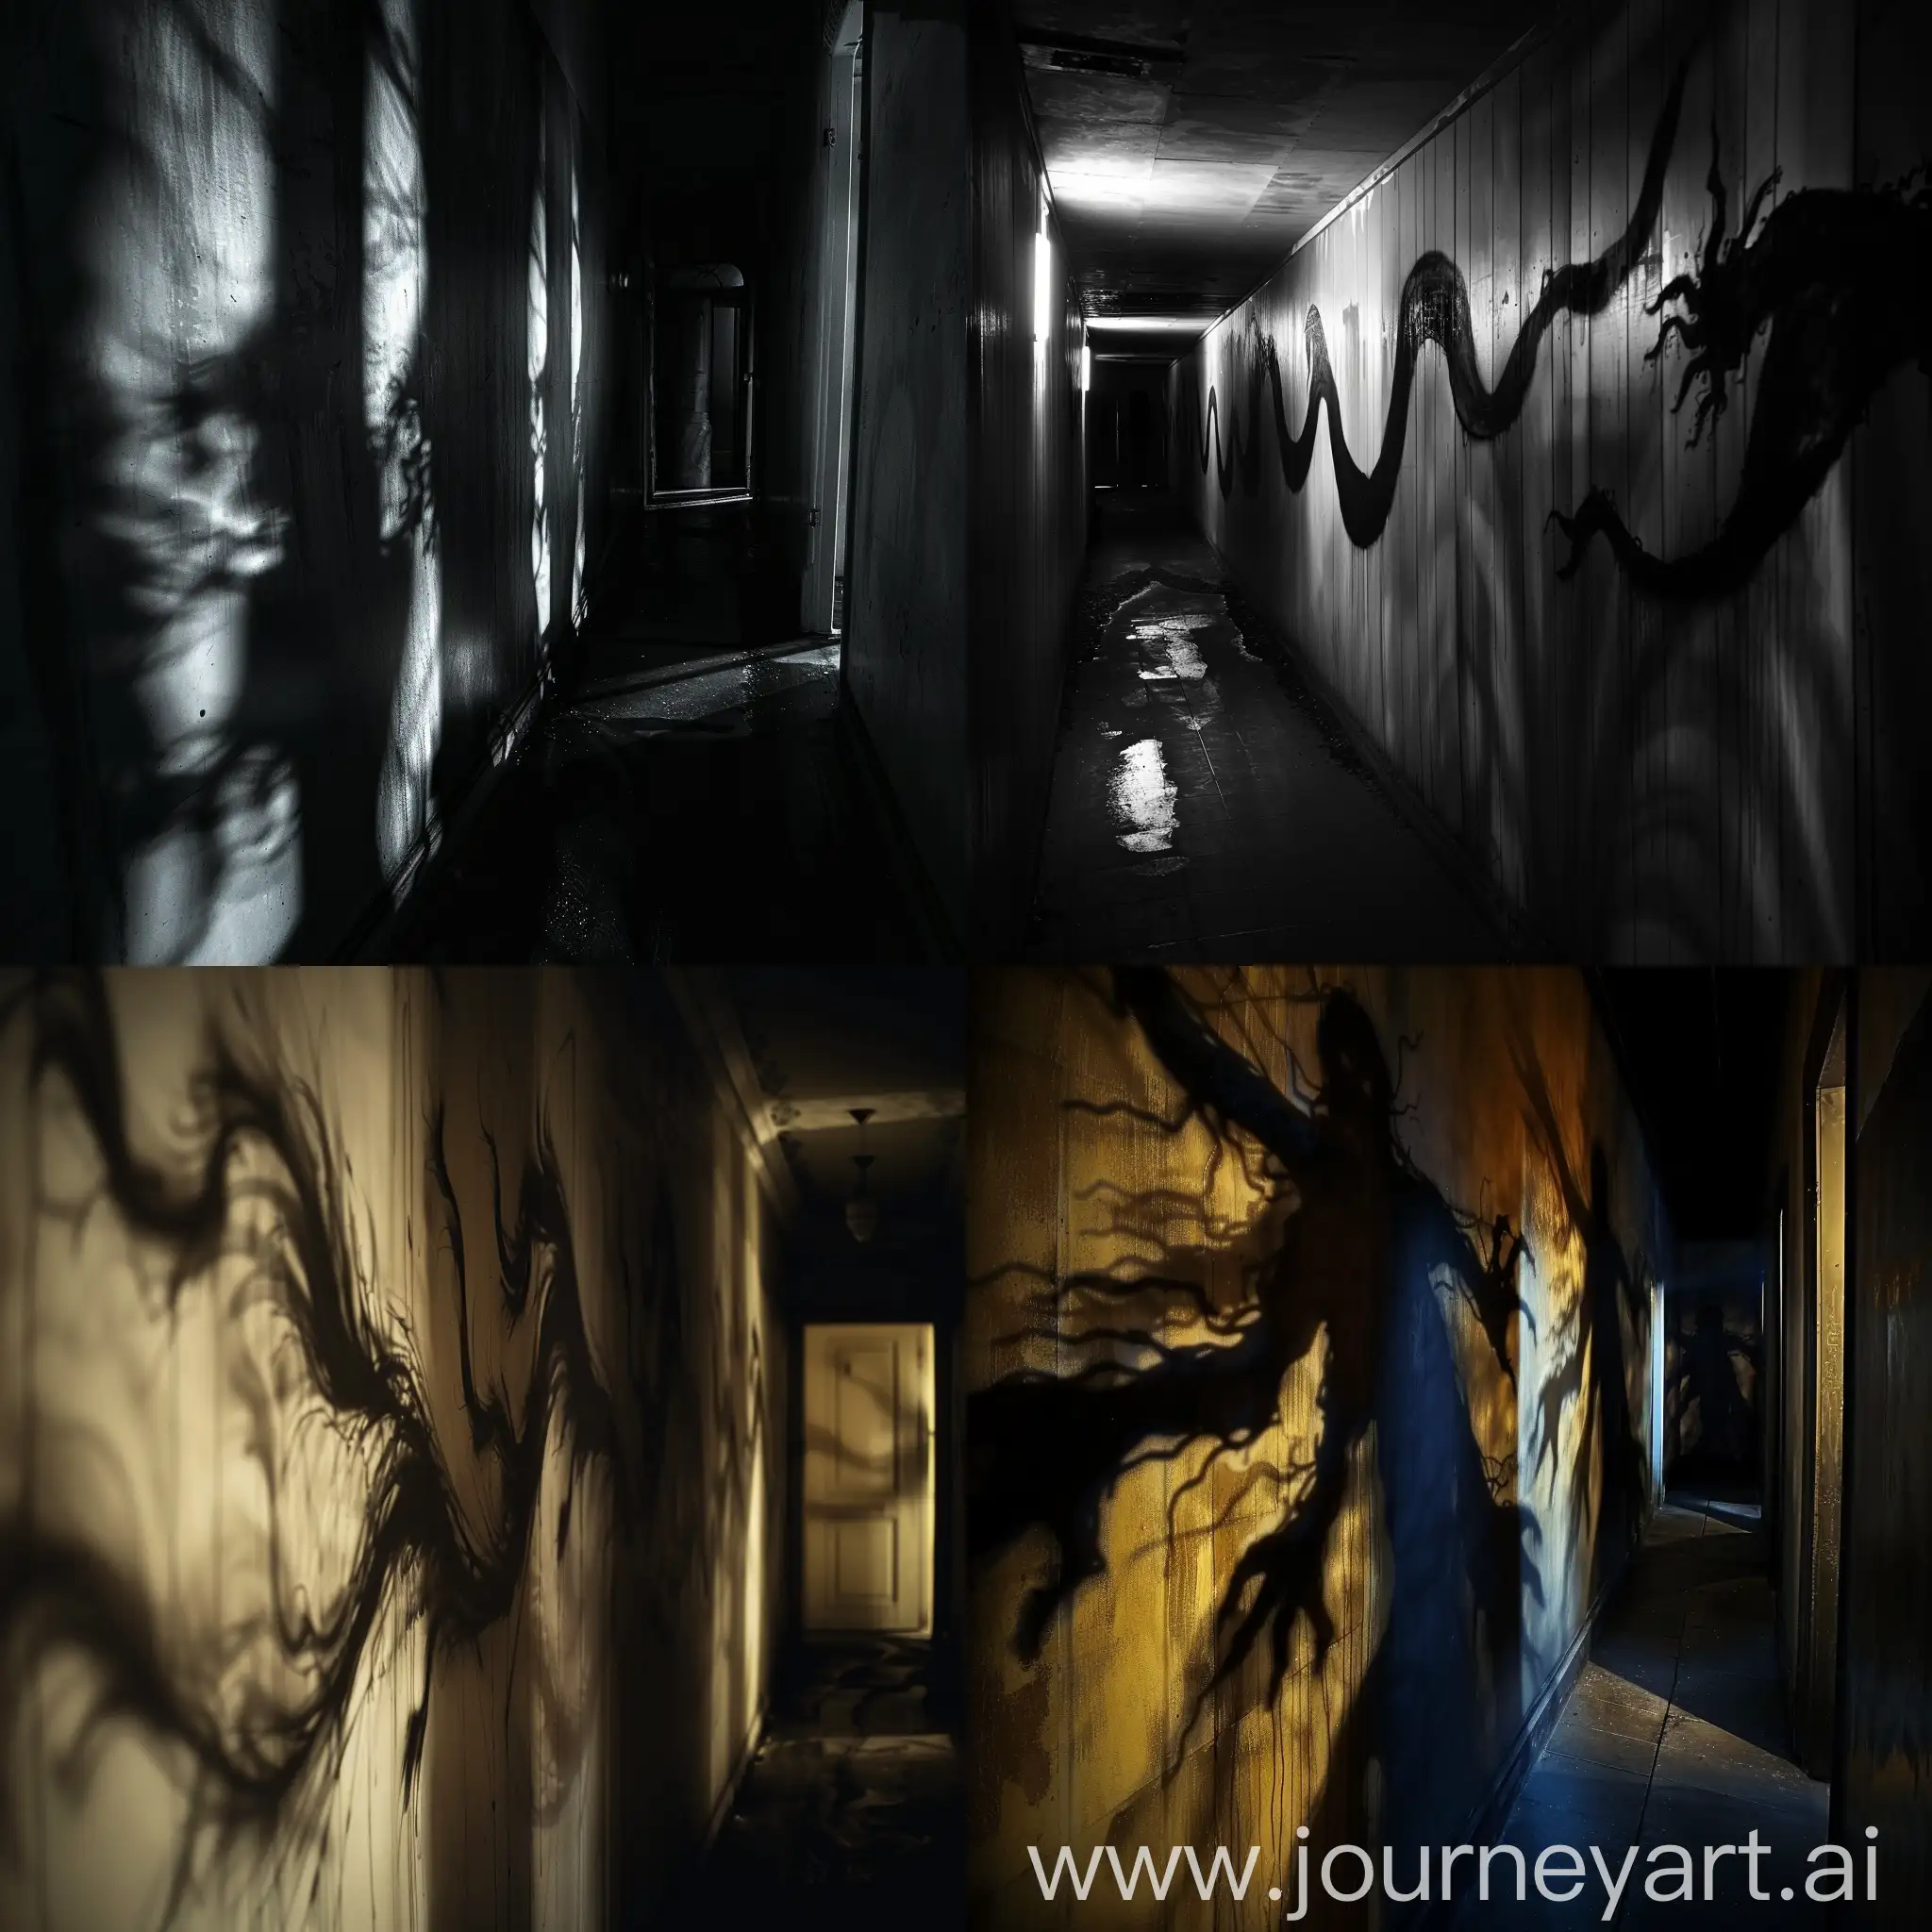 shadows writhed on walls of a dark and gloomy corridor at night,